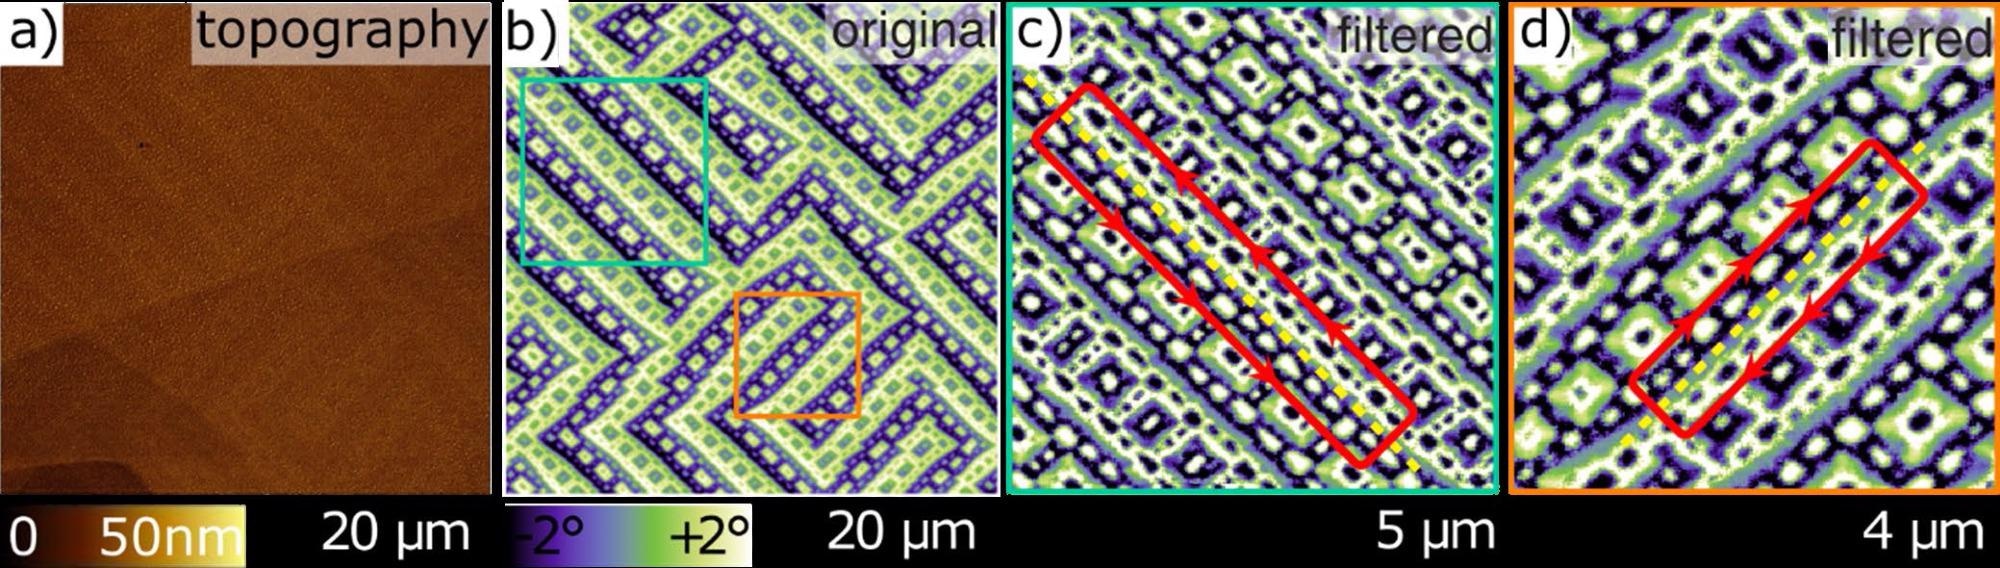 a) Sample topography b)-d) Fractal ferromagnetic domain pattern in the MFM phase of bulk crystals of Mn1.4PtSn.4 Image reproduced with permission: Phys. Rev. B 102, 174447 – Published 30 November 2020